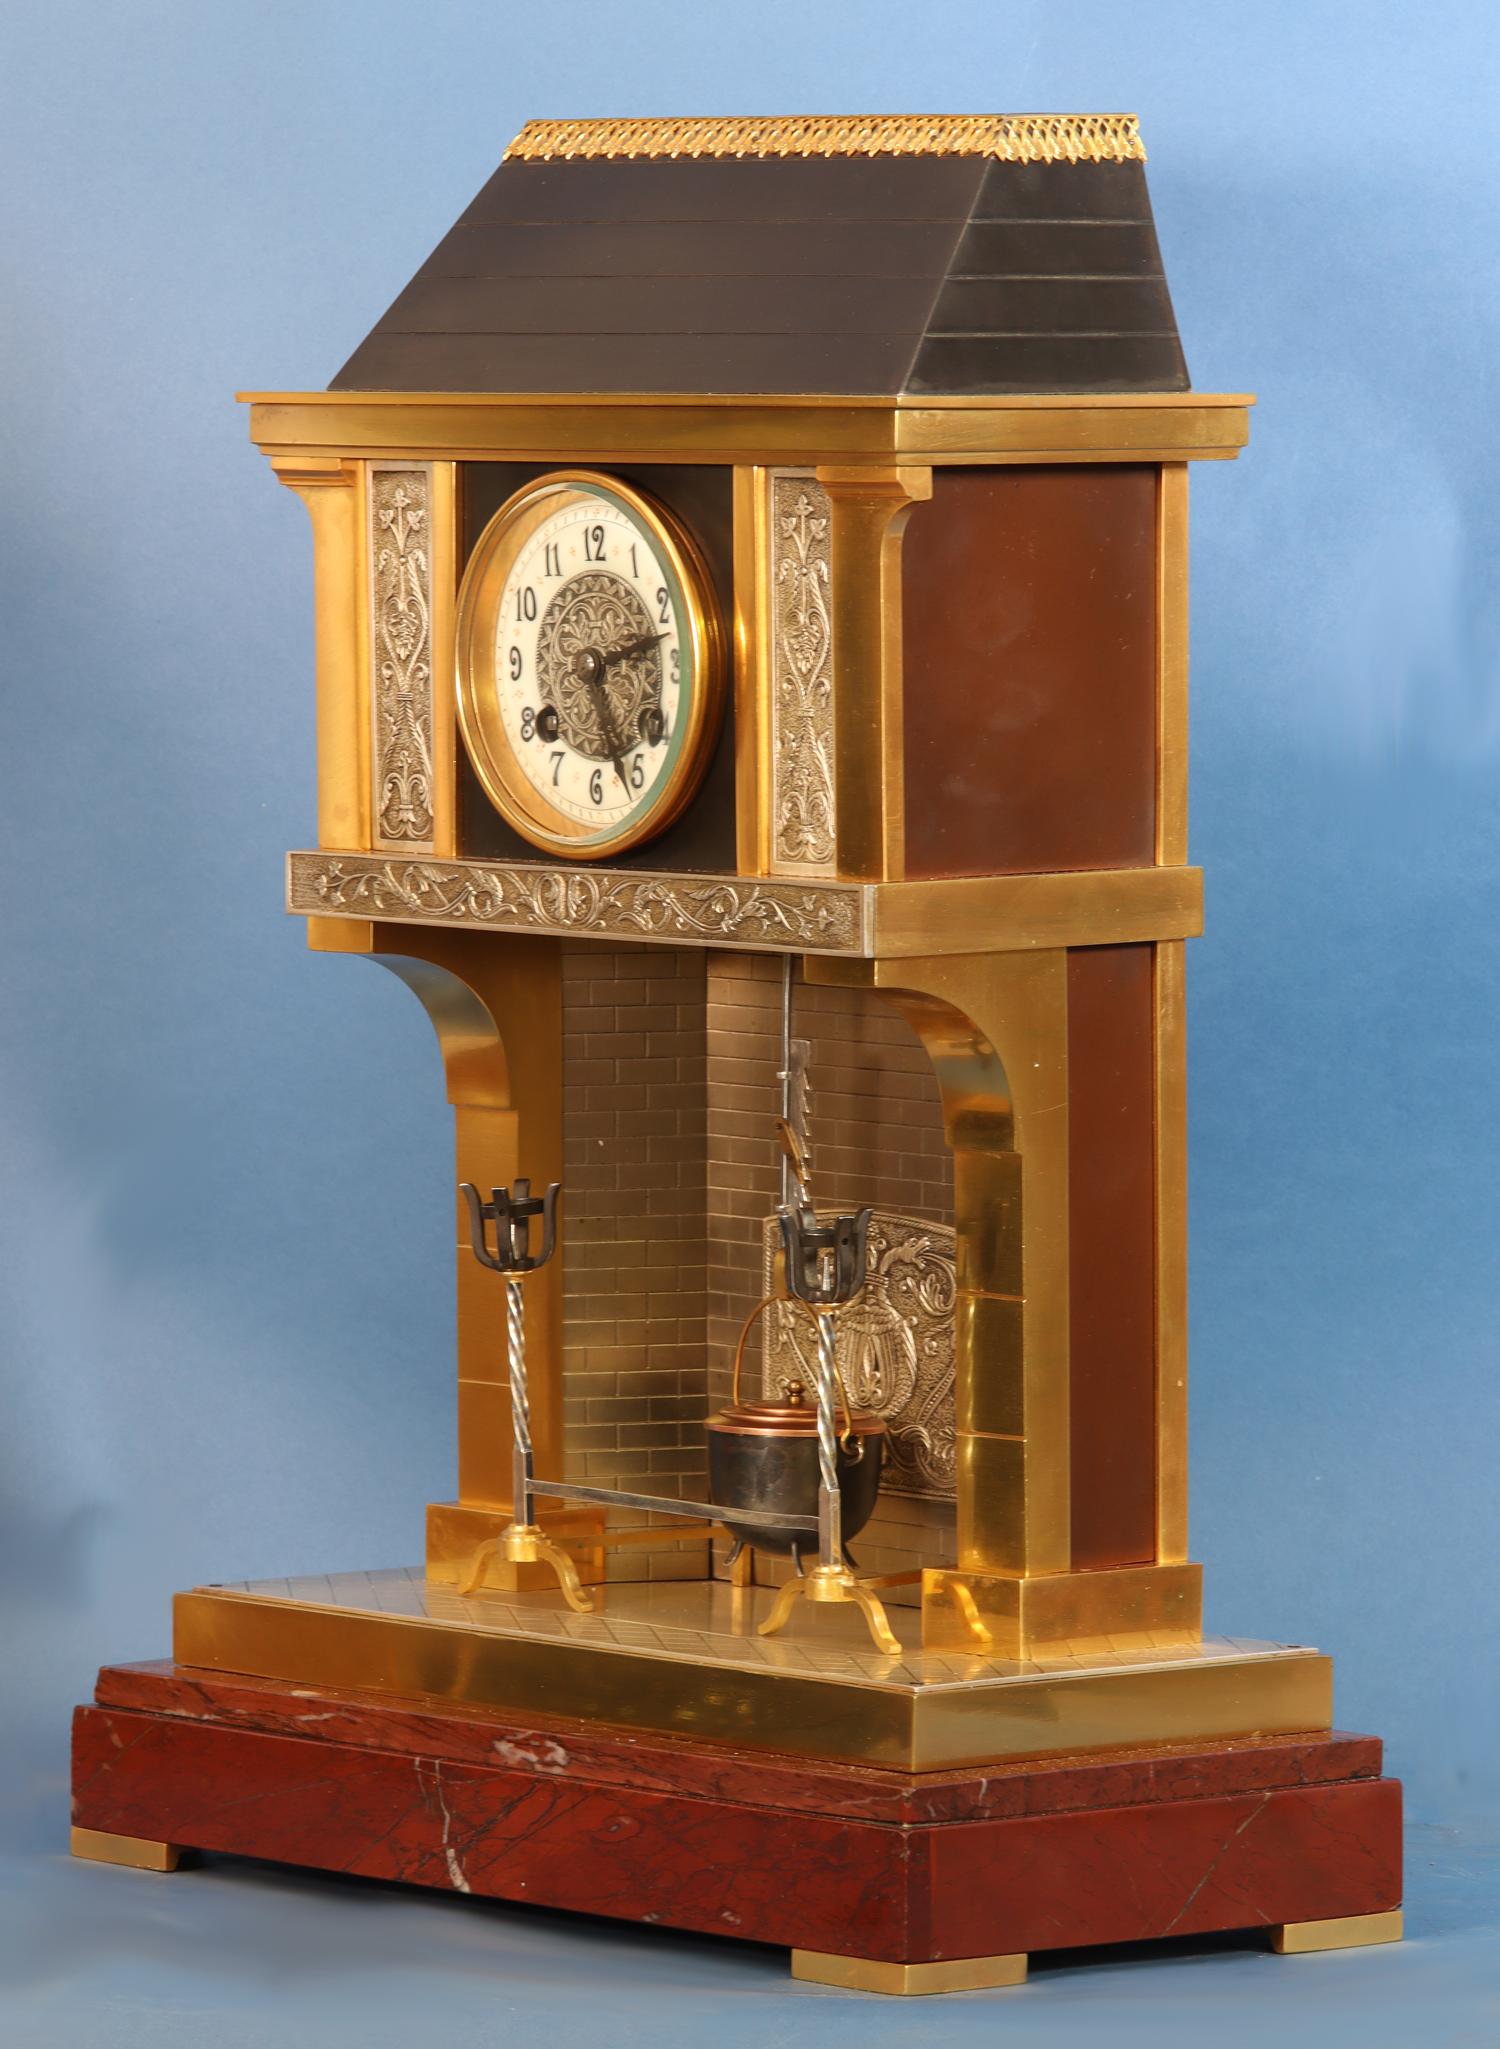 Maker:	
GLT

Description:	
A late 19th century French multi-finish fireplace clock that utilizes the swinging pot as the pendulum.

Case:	
The multi-finish gilt-bronze case depicts a French chateau’s fire place with cast decorative plaques,